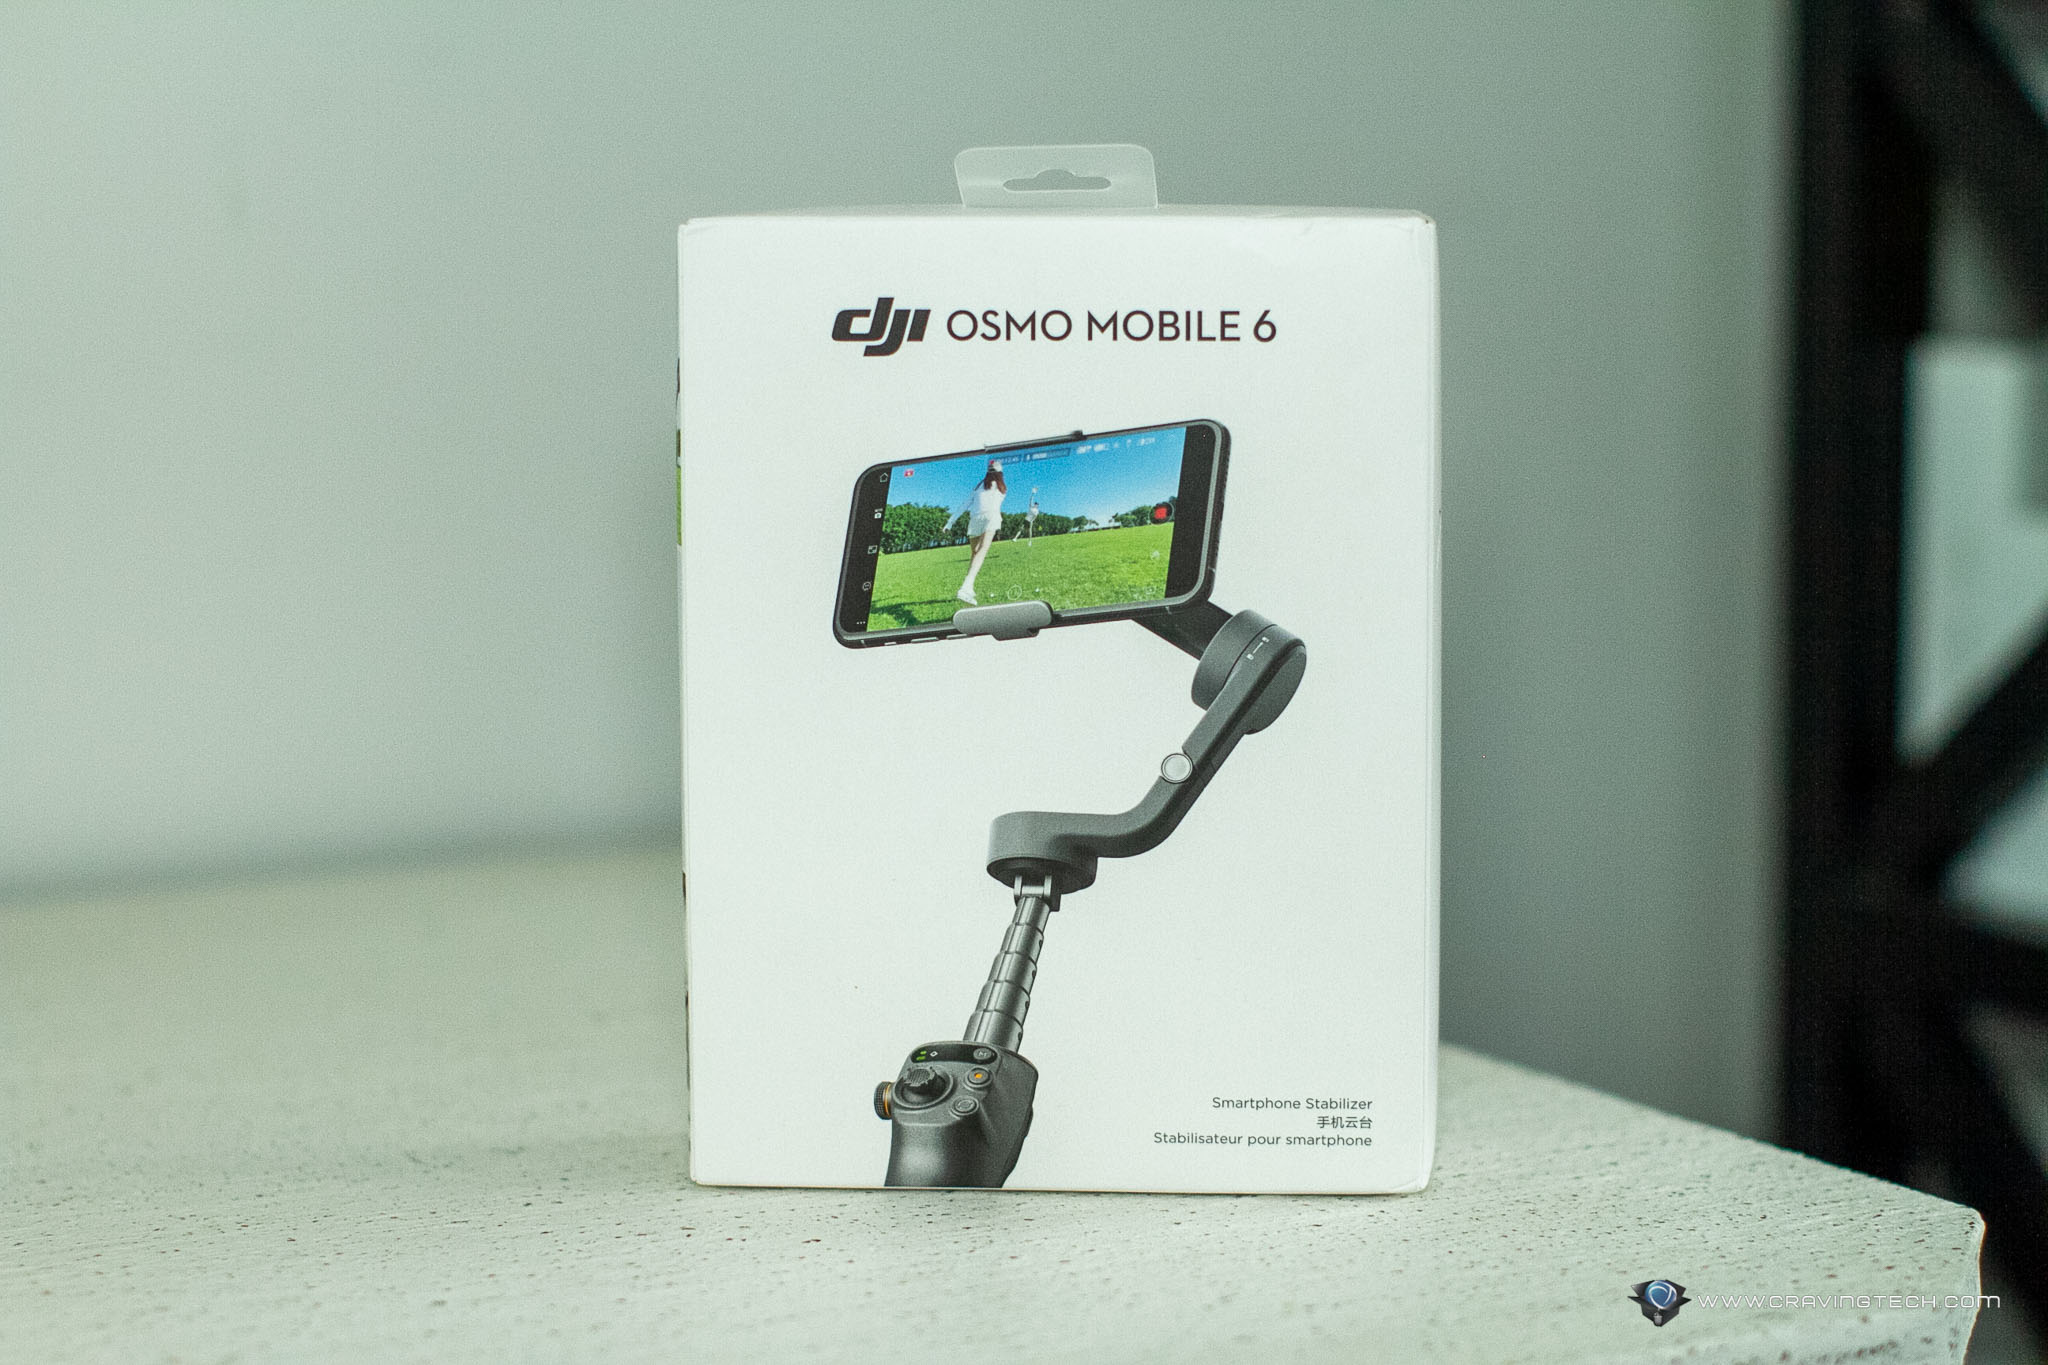 DJI Osmo Mobile 6 Review - Make professional videos easily